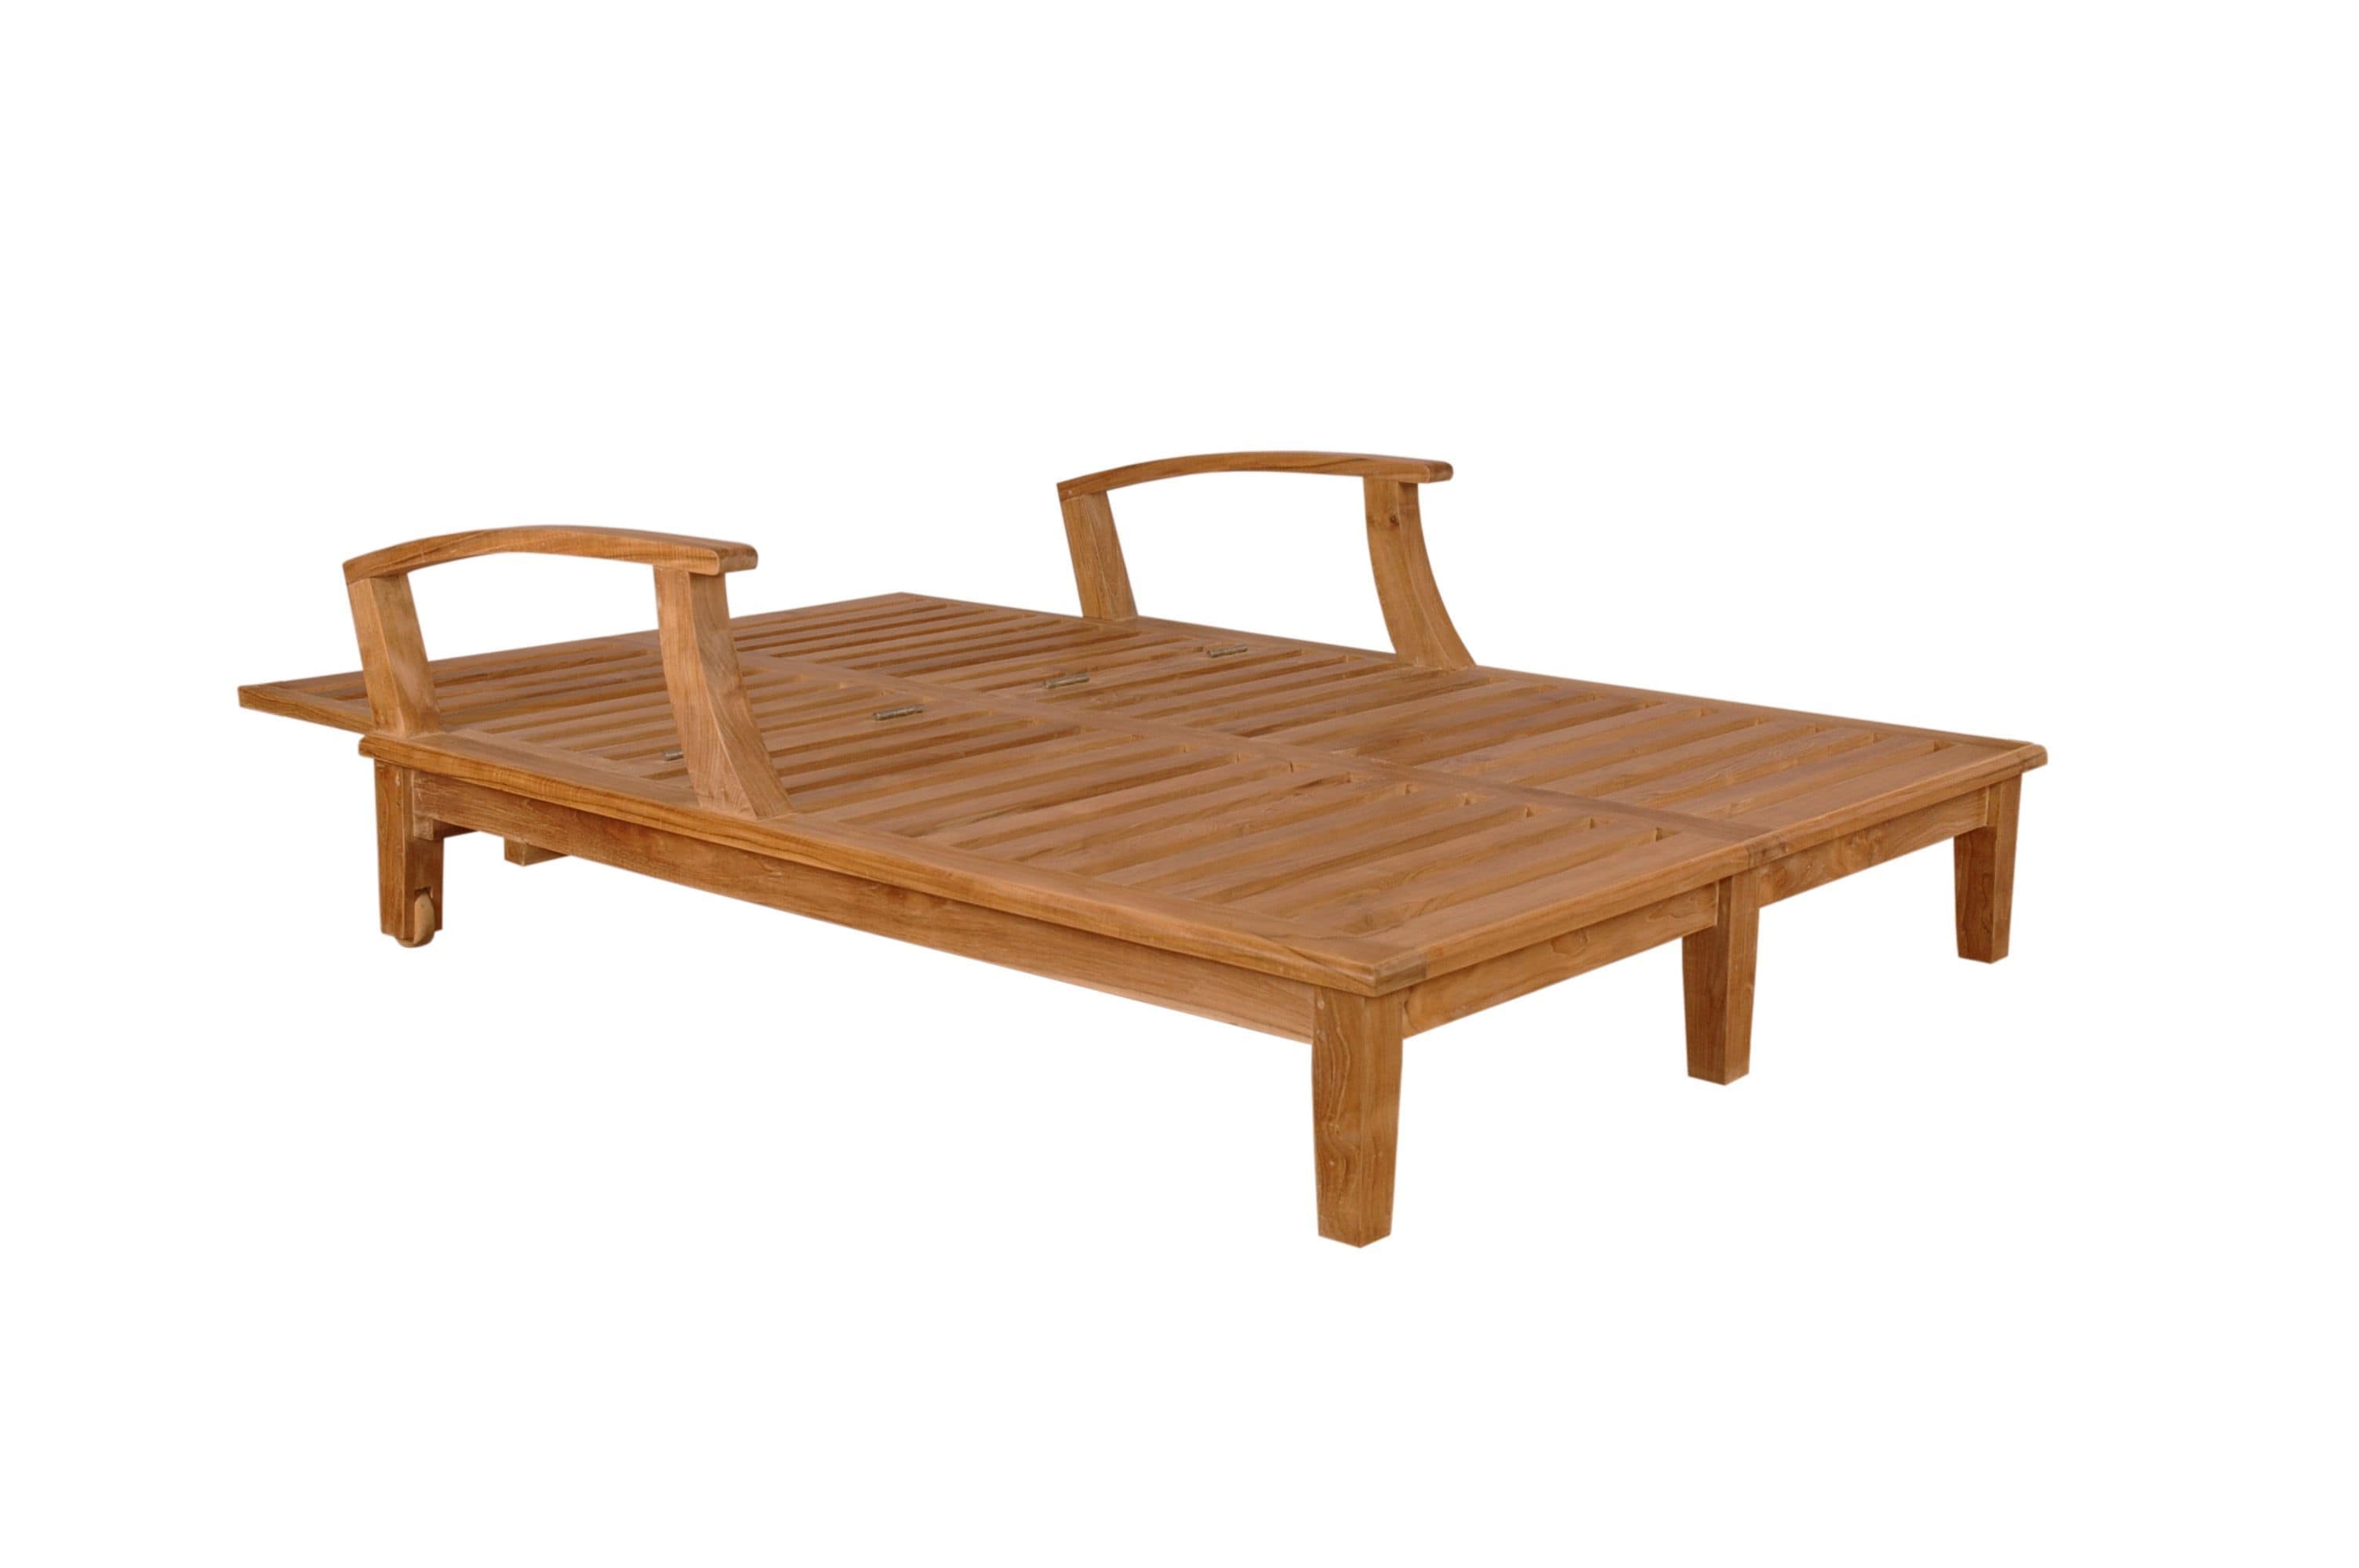 Anderson Teak Chaise Lounge Anderson Teak Brianna Double Sun Lounger with Arm